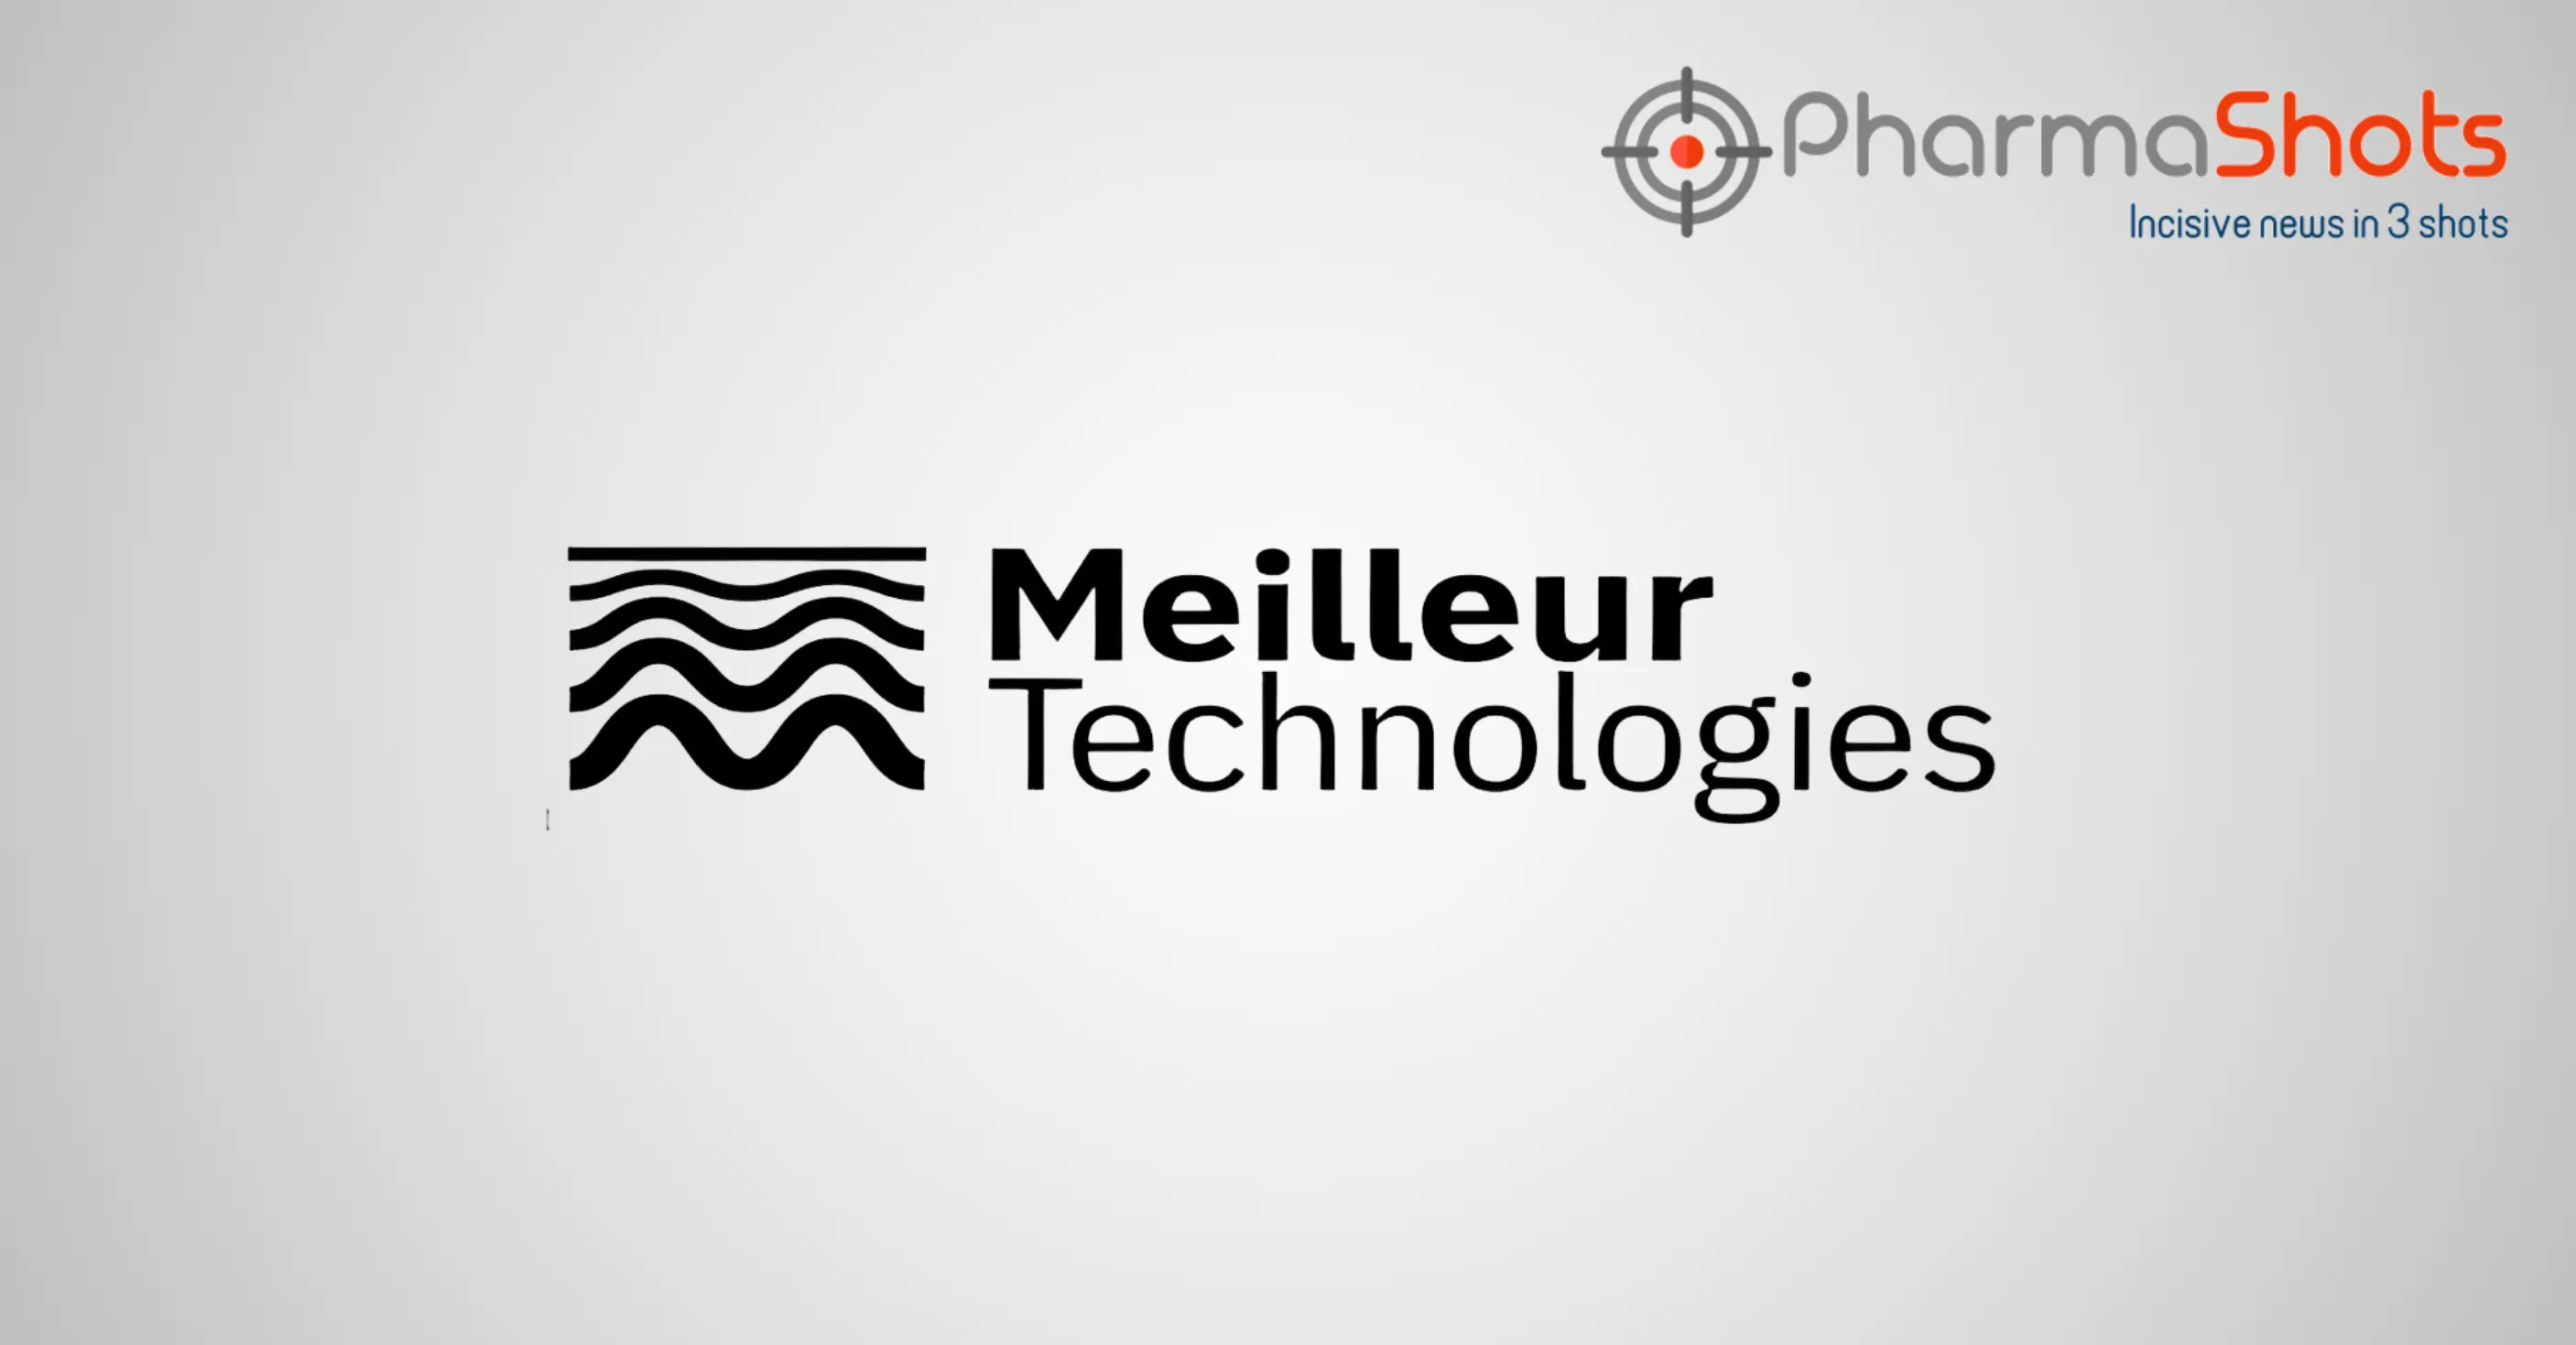 Lantheus Strengthens its Alzheimer’s Disease Pipeline Through the Acquisition of Meilleur Technologies